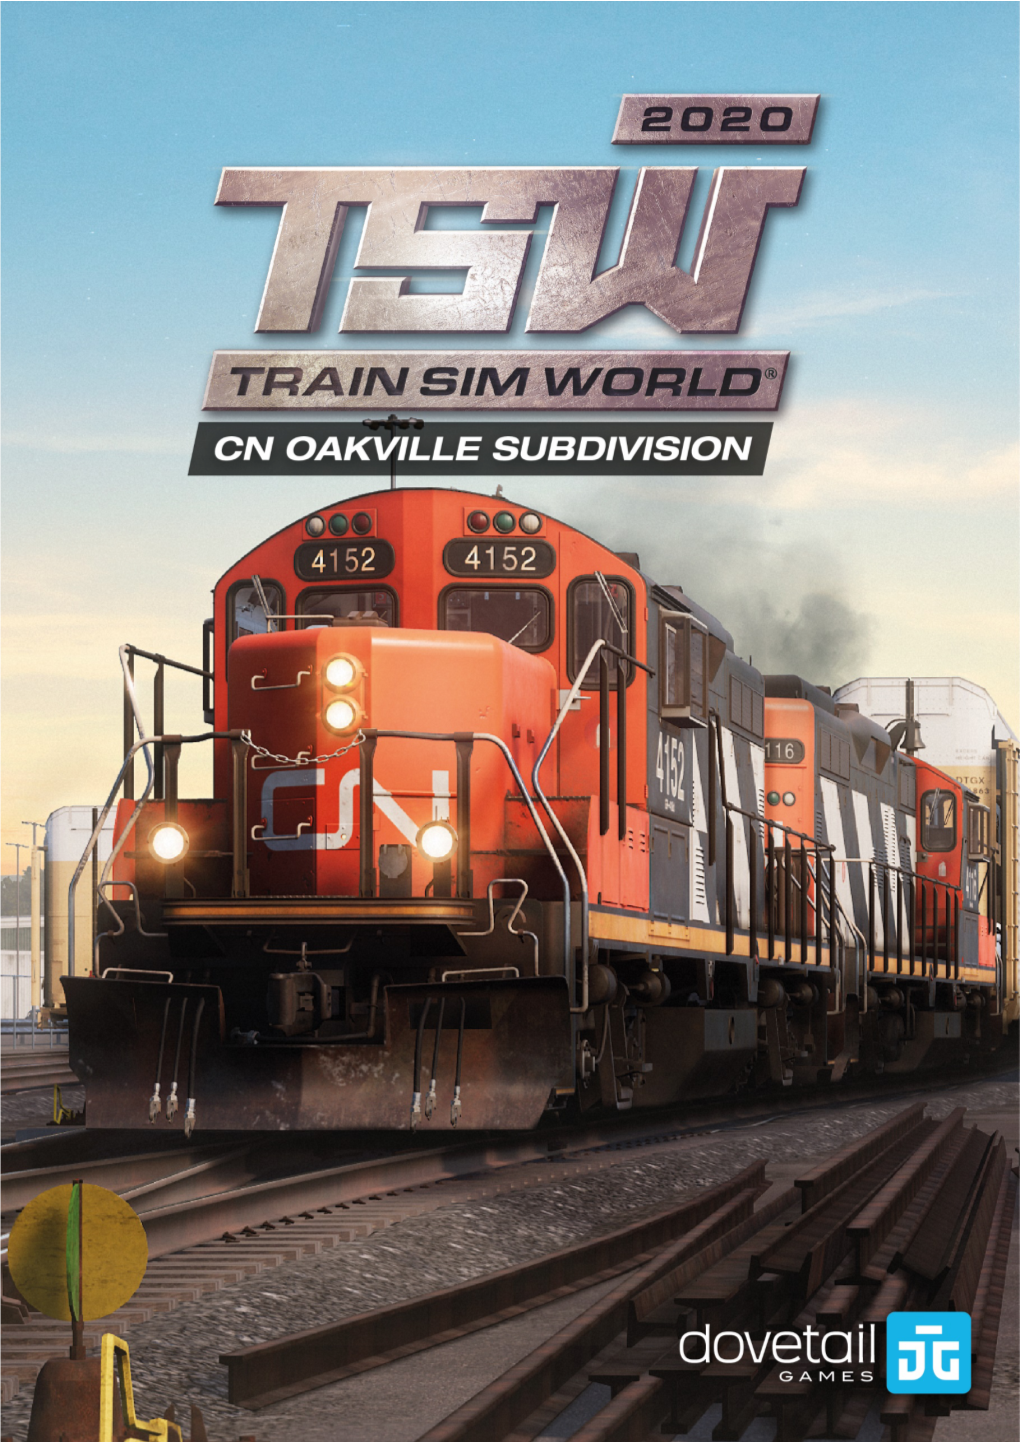 Train Sim World” and “Simugraph” Are Trademarks Or Registered Trademarks of DTG